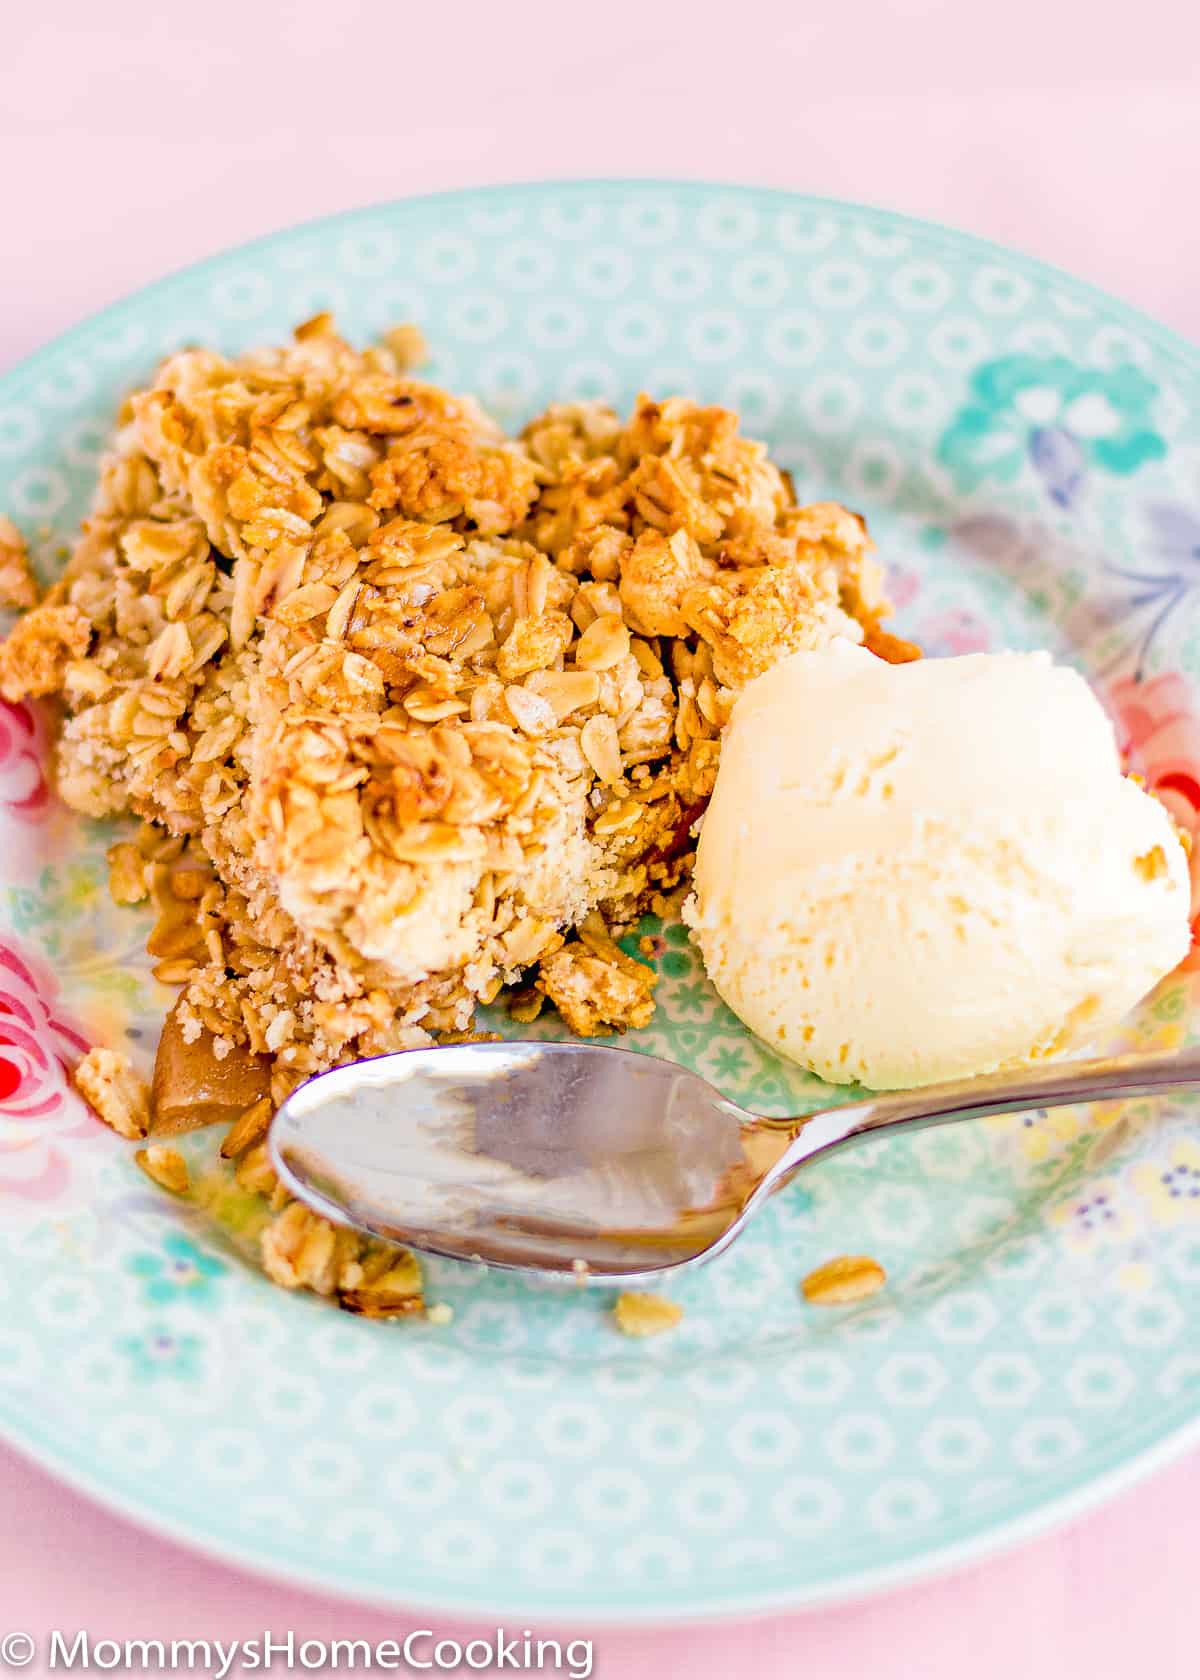 Eggless Apple Crumble with Oats with vanilla ice cream